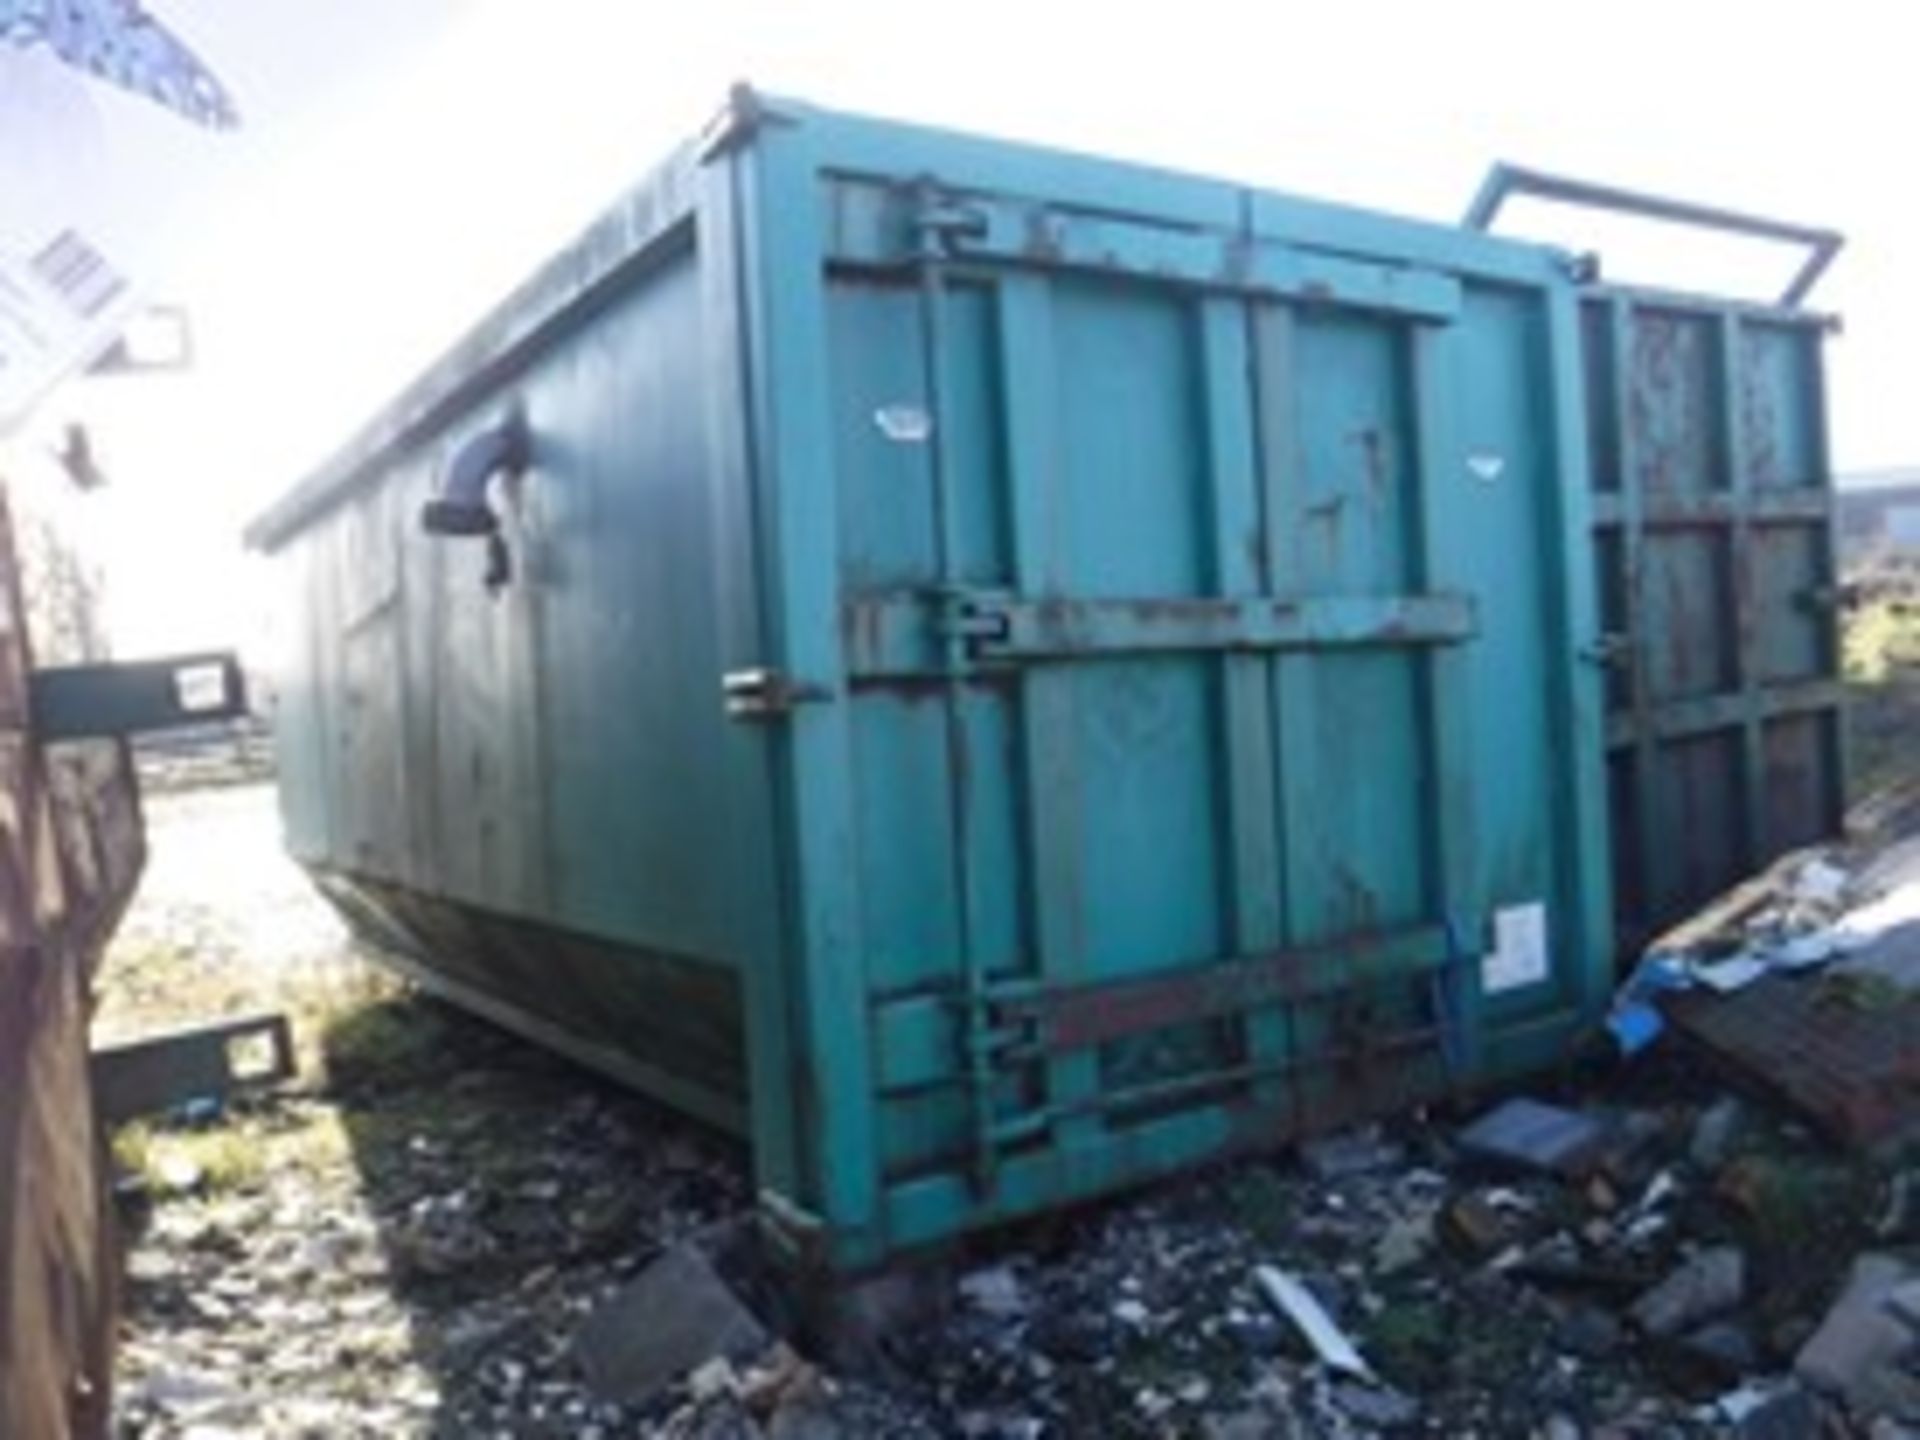 OPEN TOP SKIP.2 REAR DOORS MANFACTURED BY SKIP UNITS. W2300 H2400 L5950. VERY SLIGHT SURFACE RUST. V - Image 2 of 2